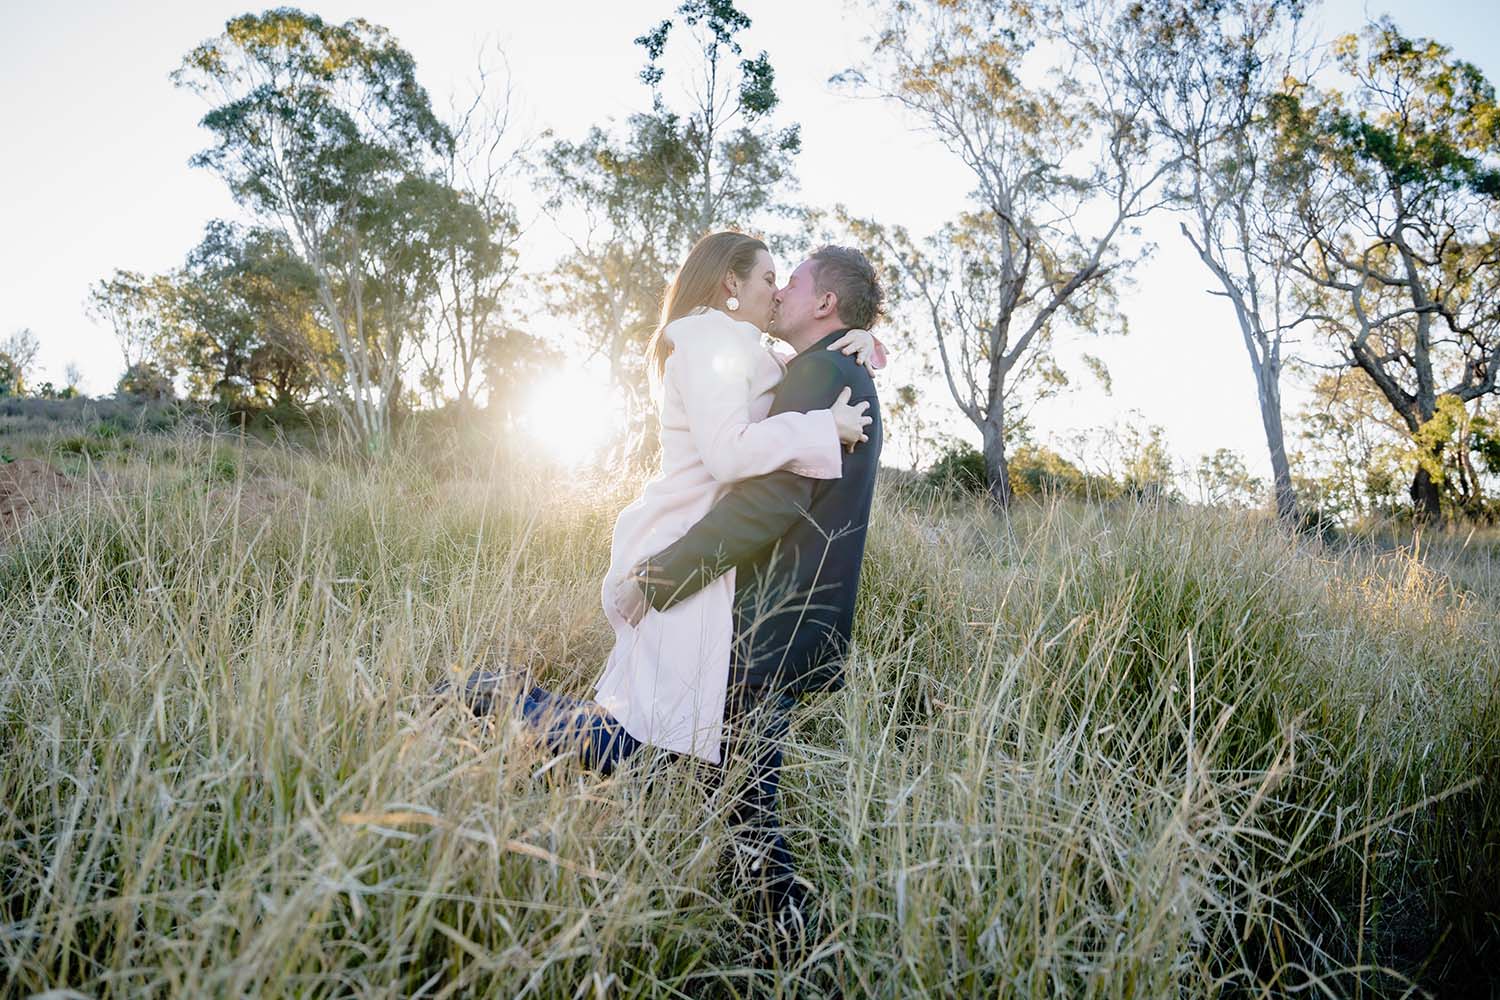 Engagement Photography - couple embracing in field